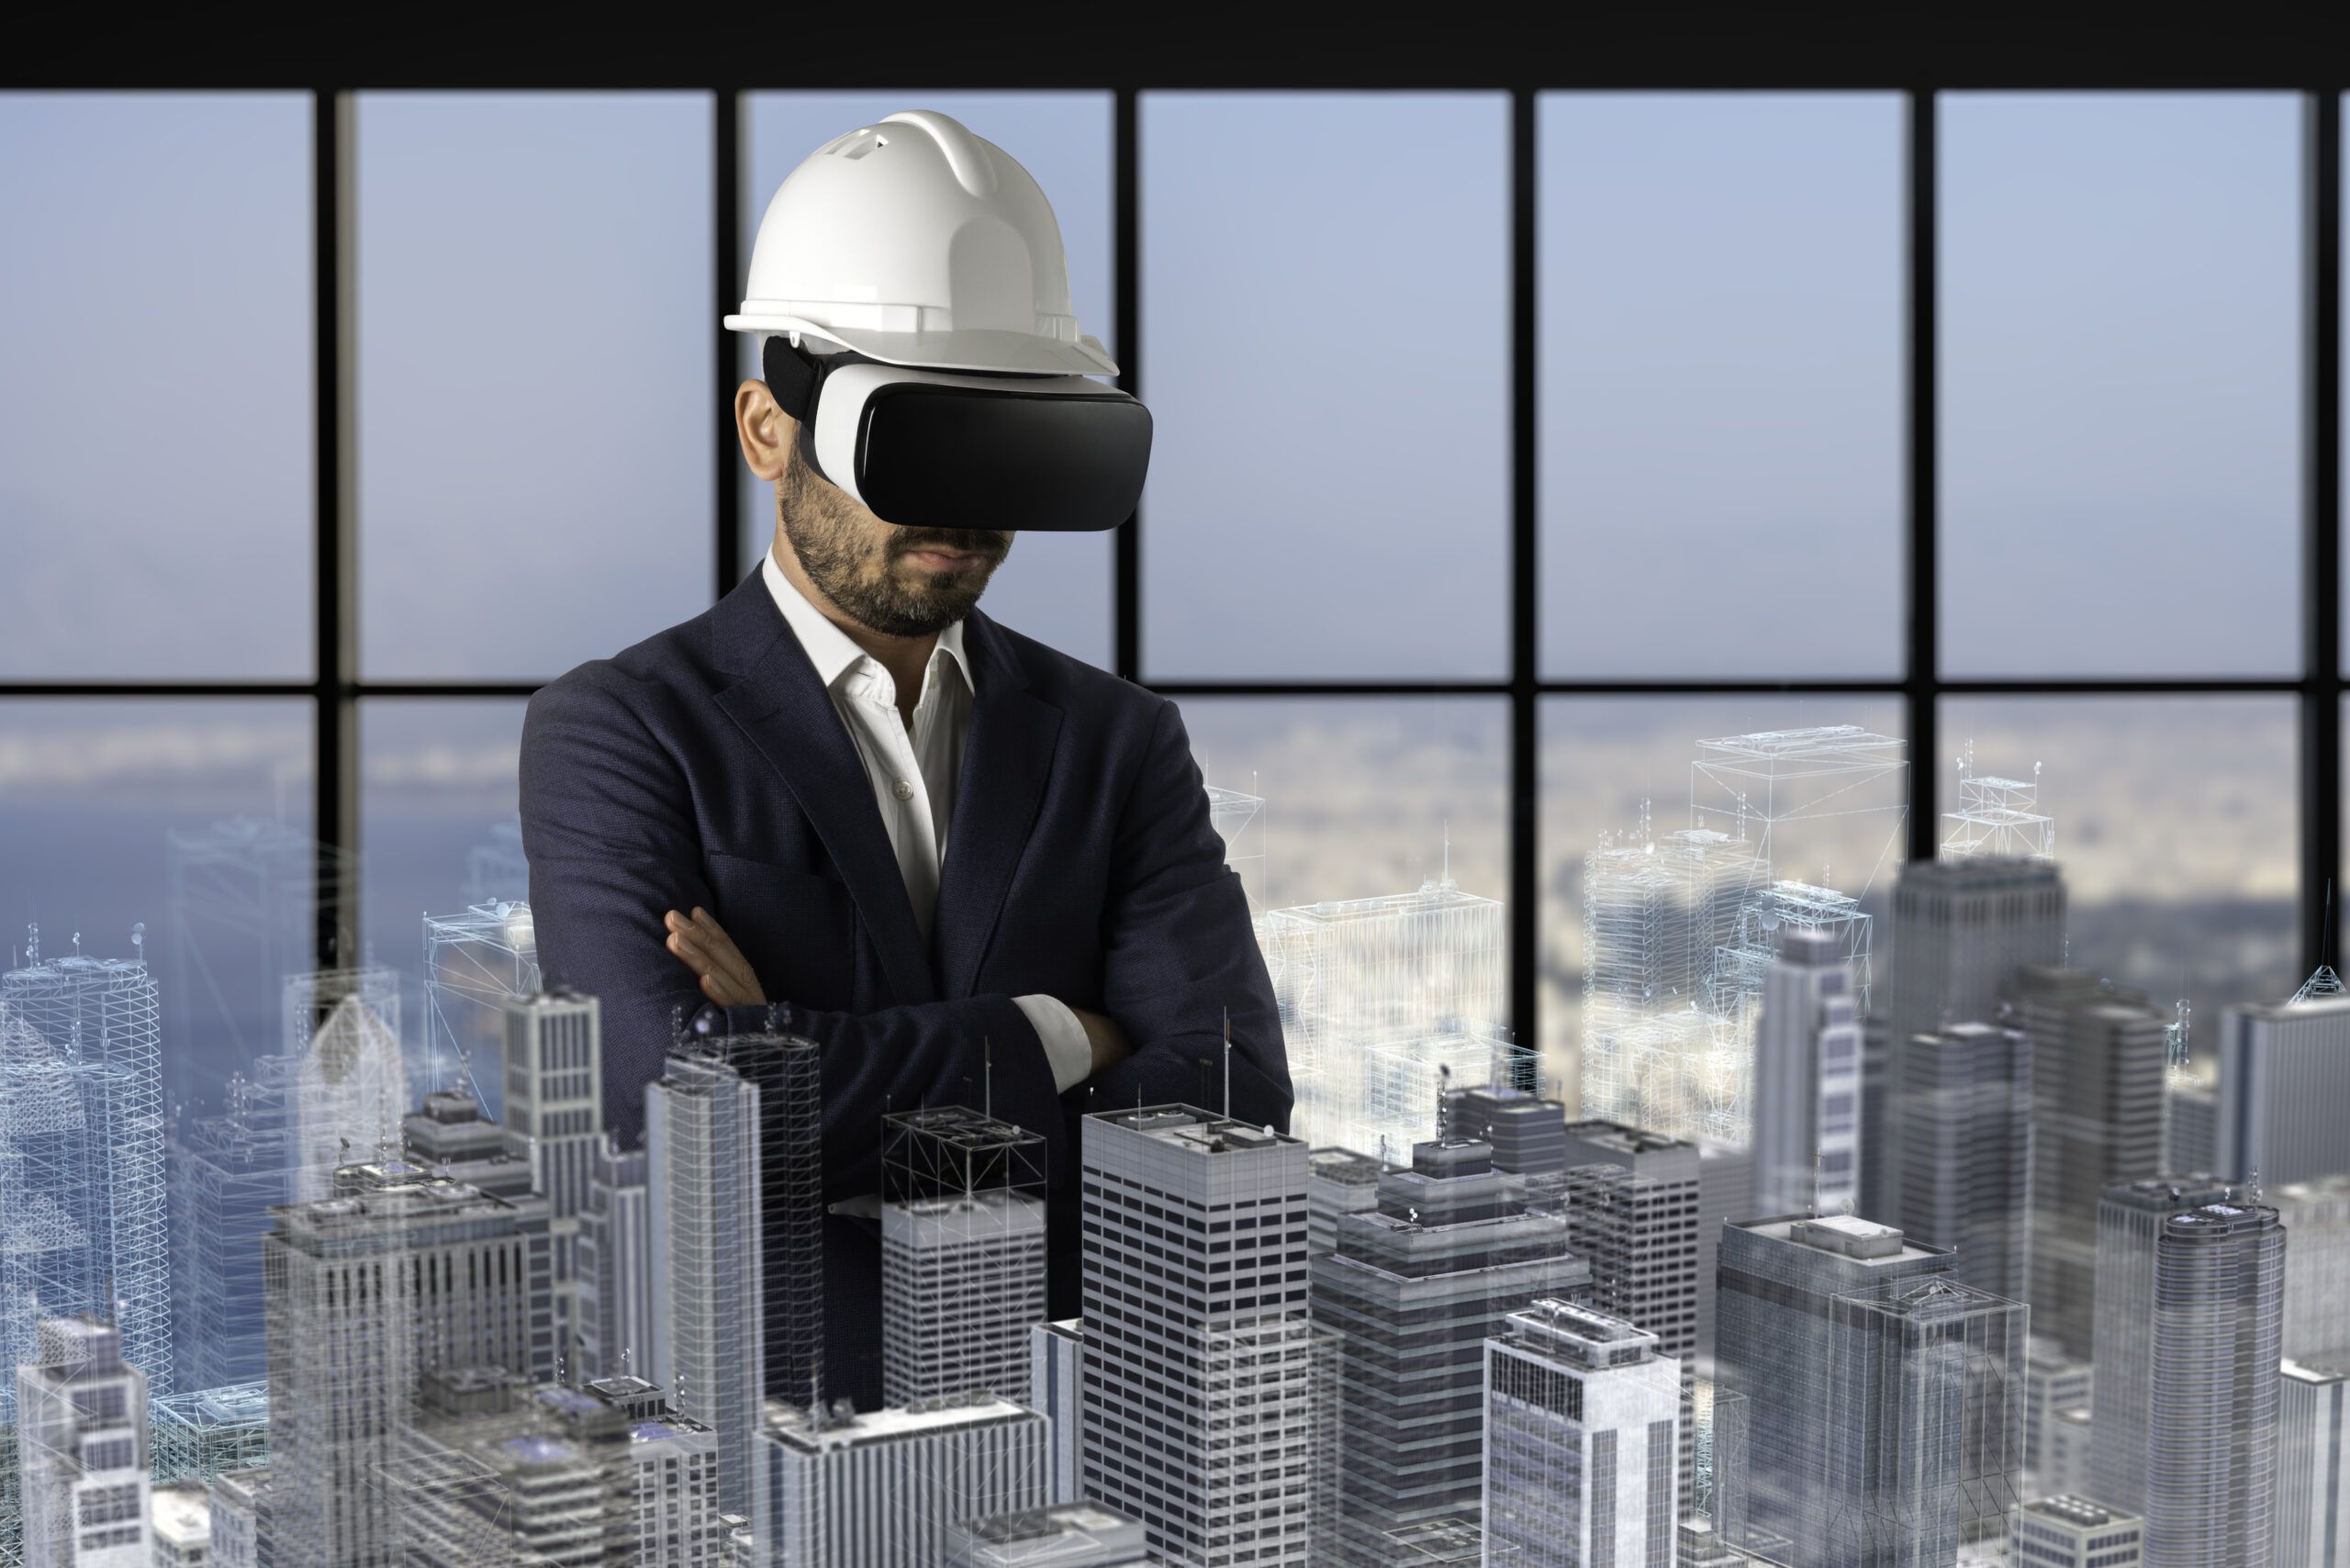 Why Should Developing Countries Consider Virtual Real Estate in the Metaverse?